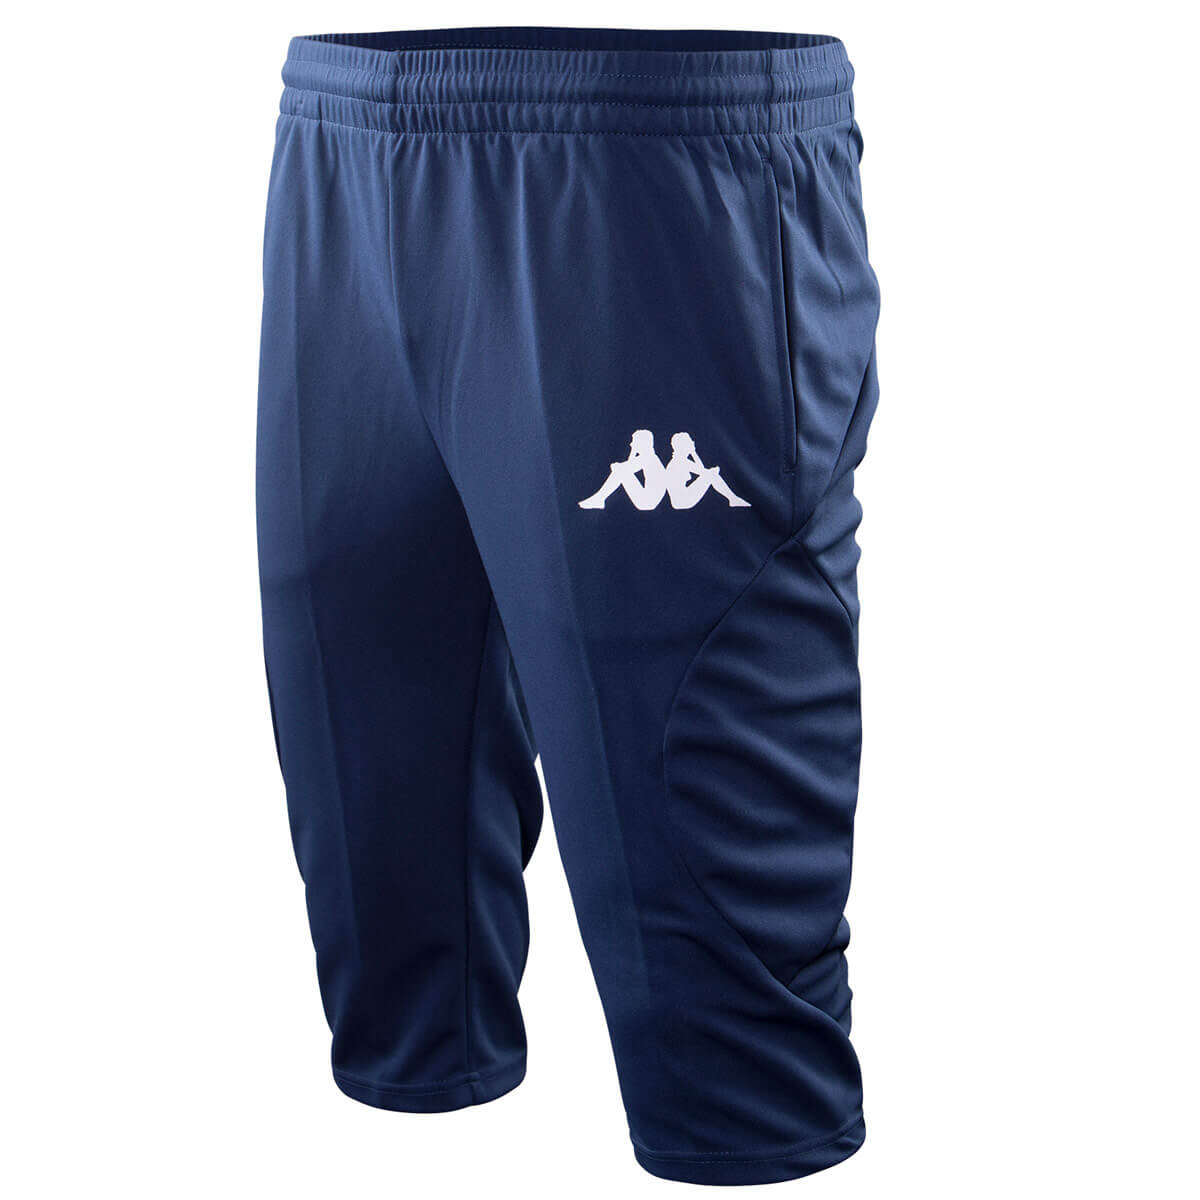 MAGCOMSEN Mens Summer Joggers Sweatpants For Short Men With Zip Pockets  Perfect For Gym, Fitness, And Casual Wear 3/4 Size From Kong04, $17.58 |  DHgate.Com